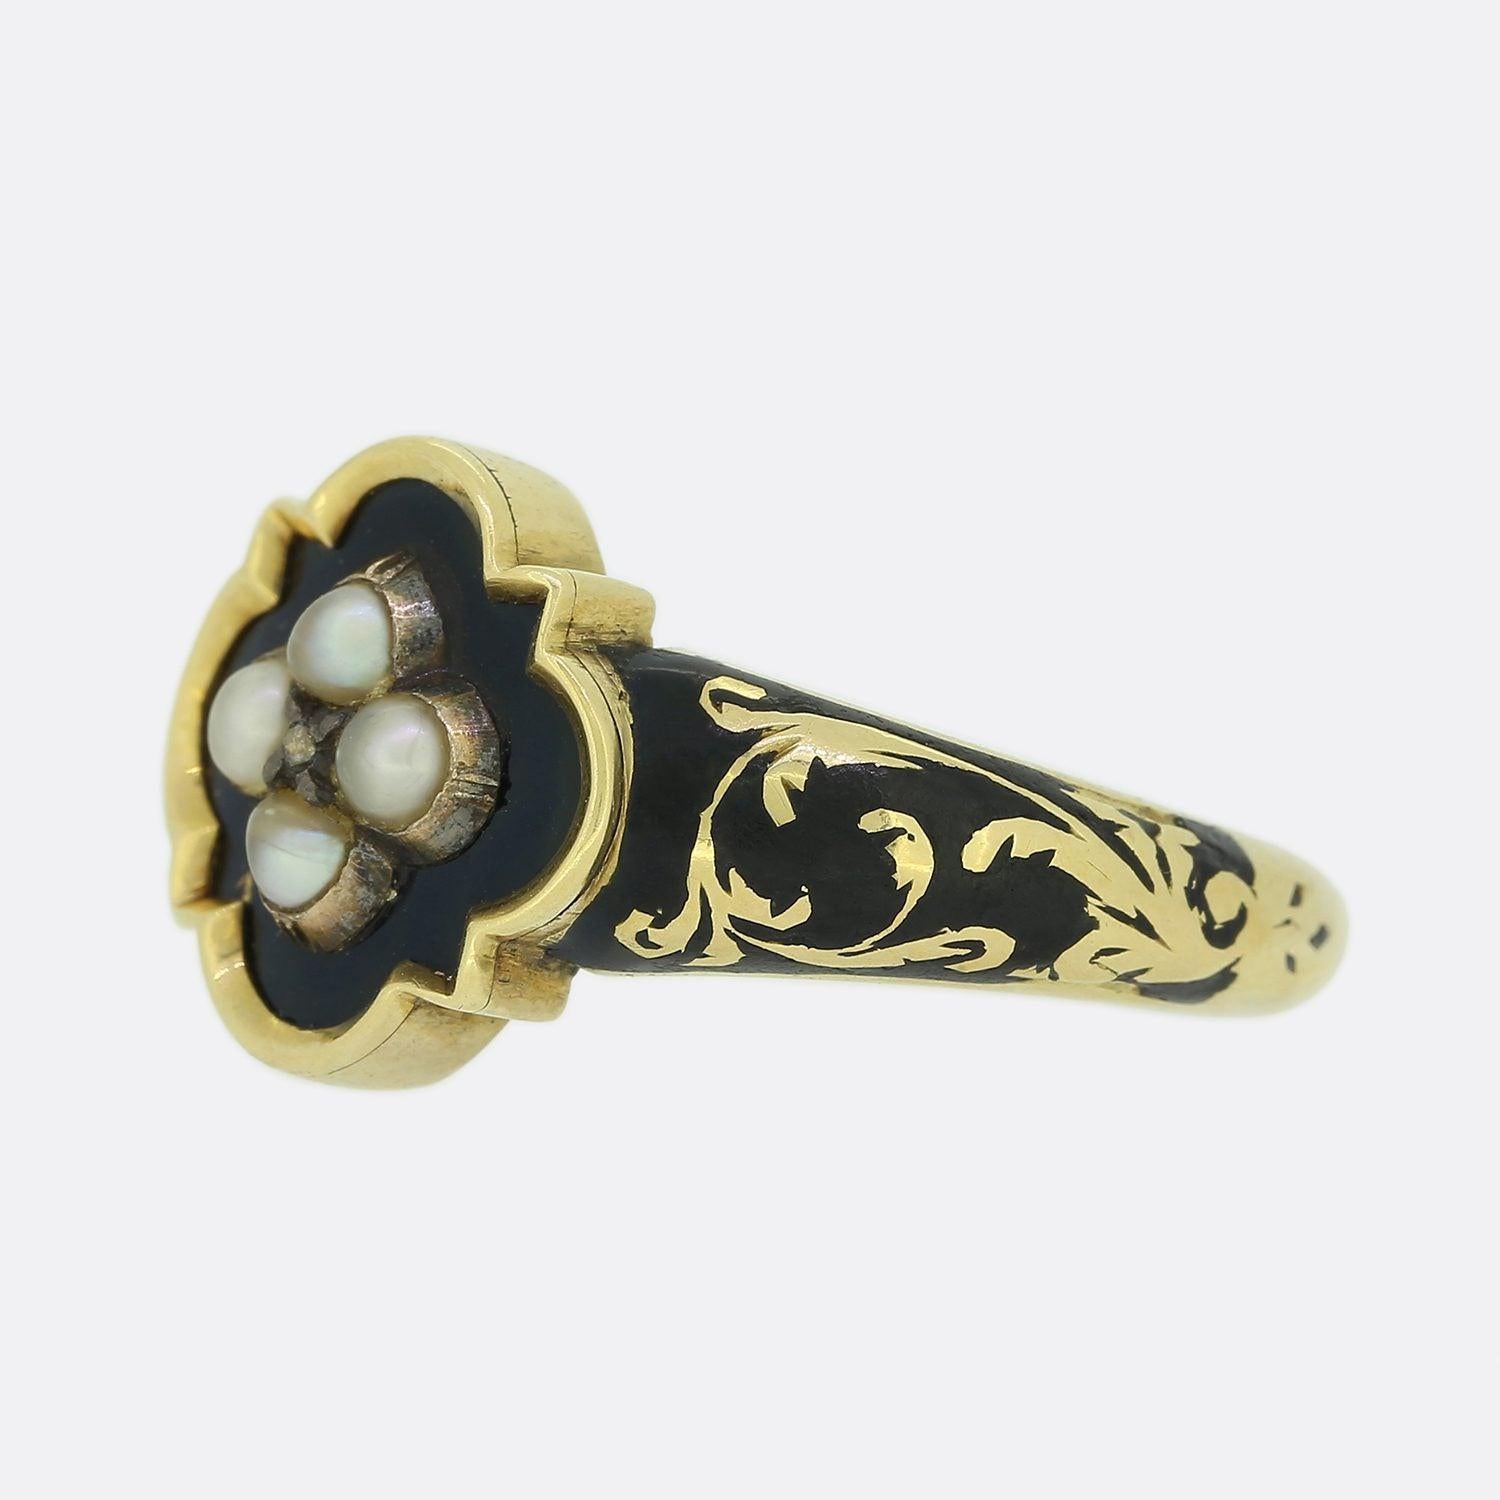 This is a wonderfully hand made yellow gold Victorian mourning ring. The ring is set with a central rose cut diamond in a cut collet setting and is surrounded by four original natural pearls. Fine black enamelling fills a shielded face and continues